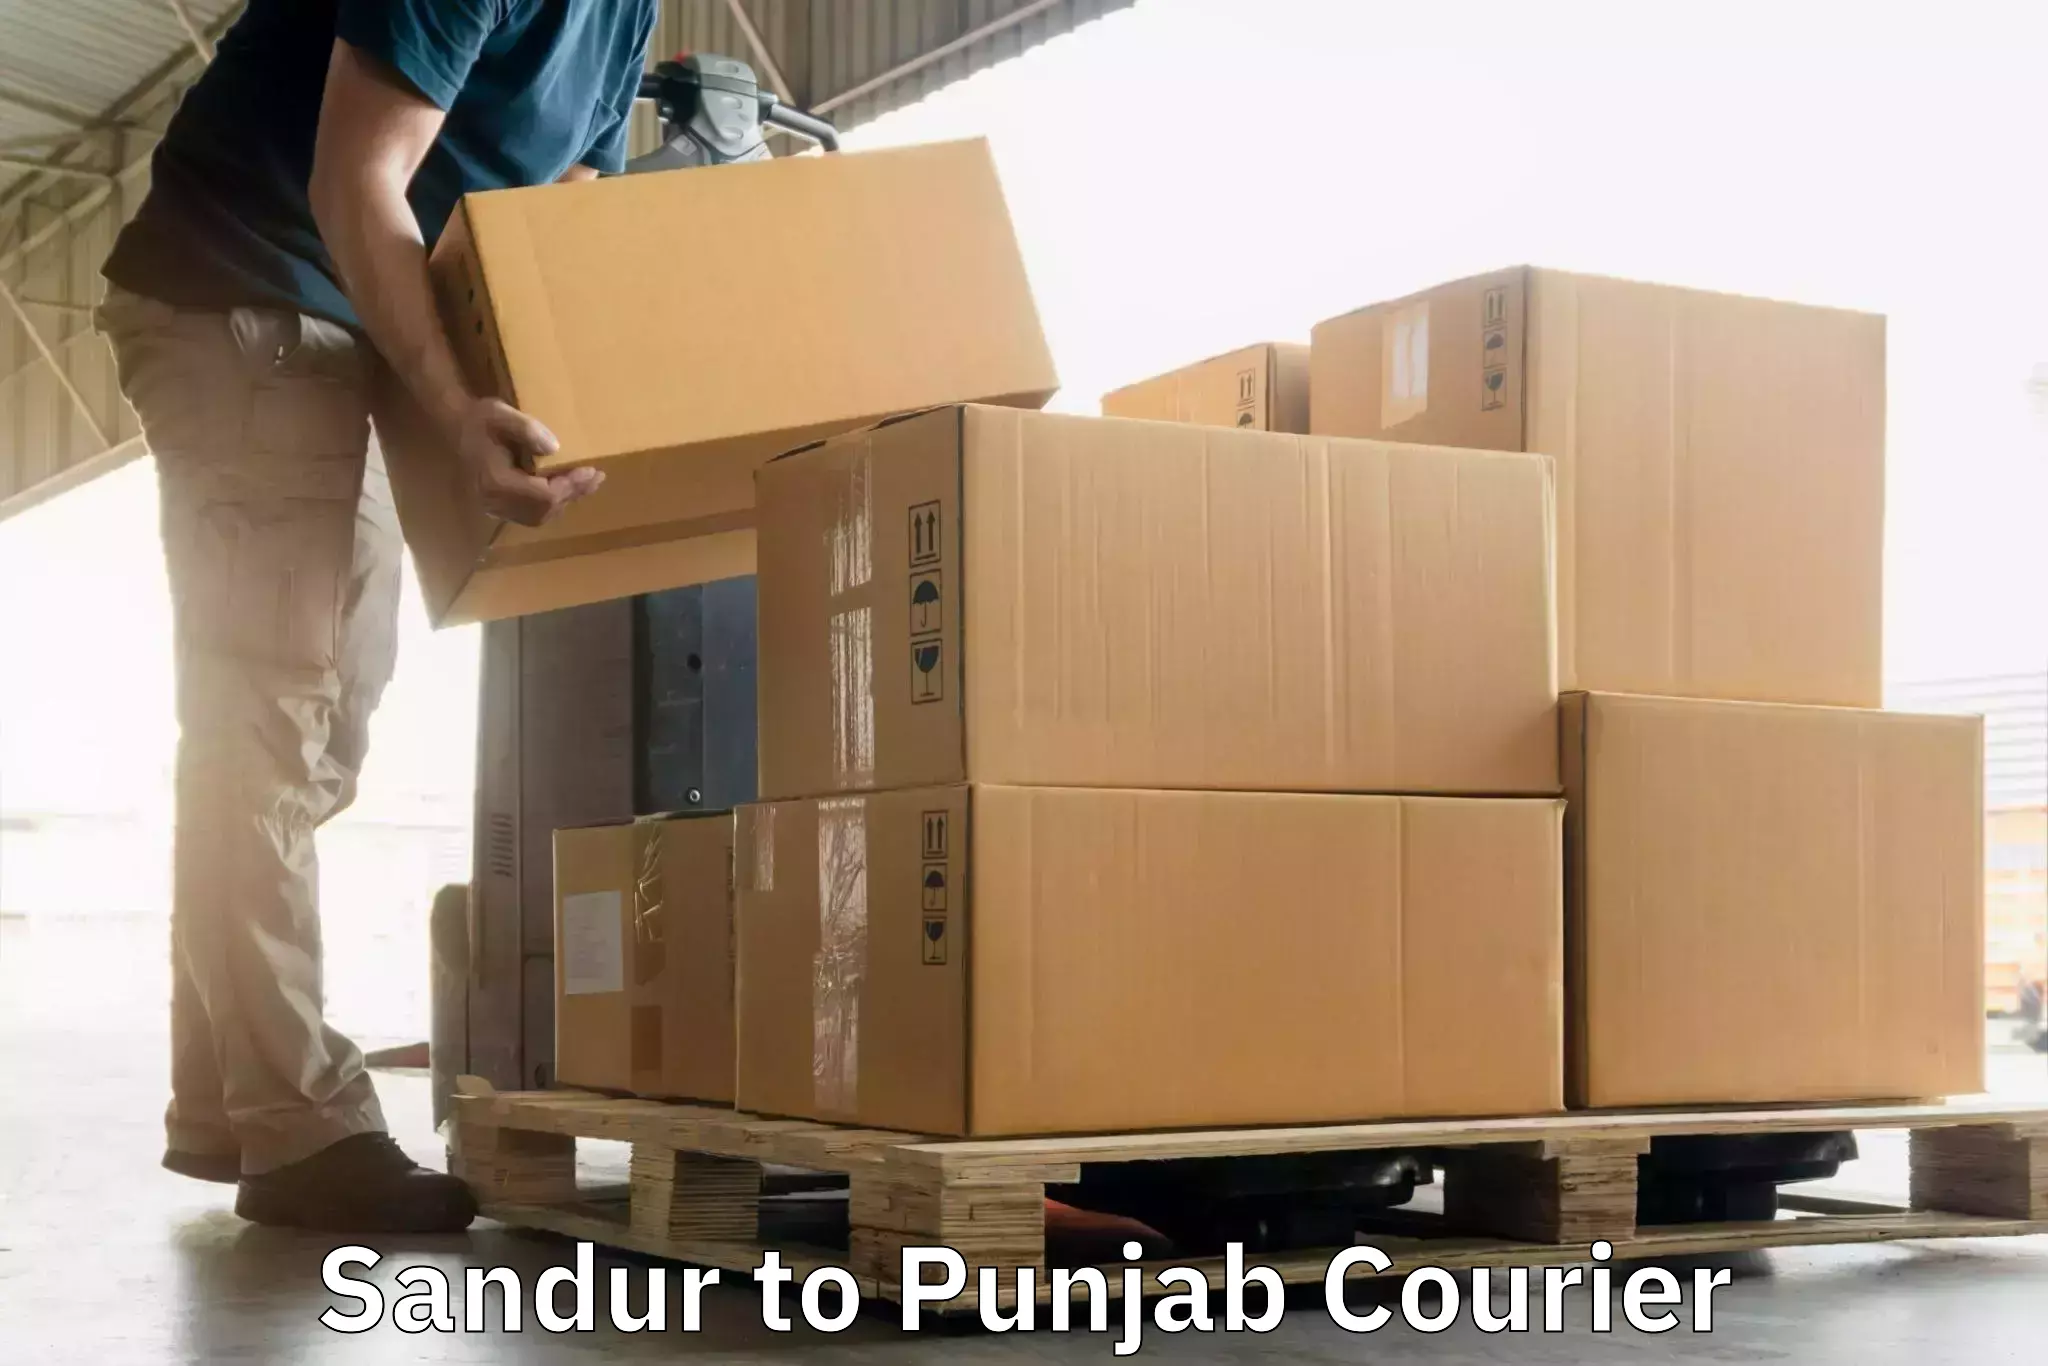 Customer-oriented courier services Sandur to Sultanpur Lodhi